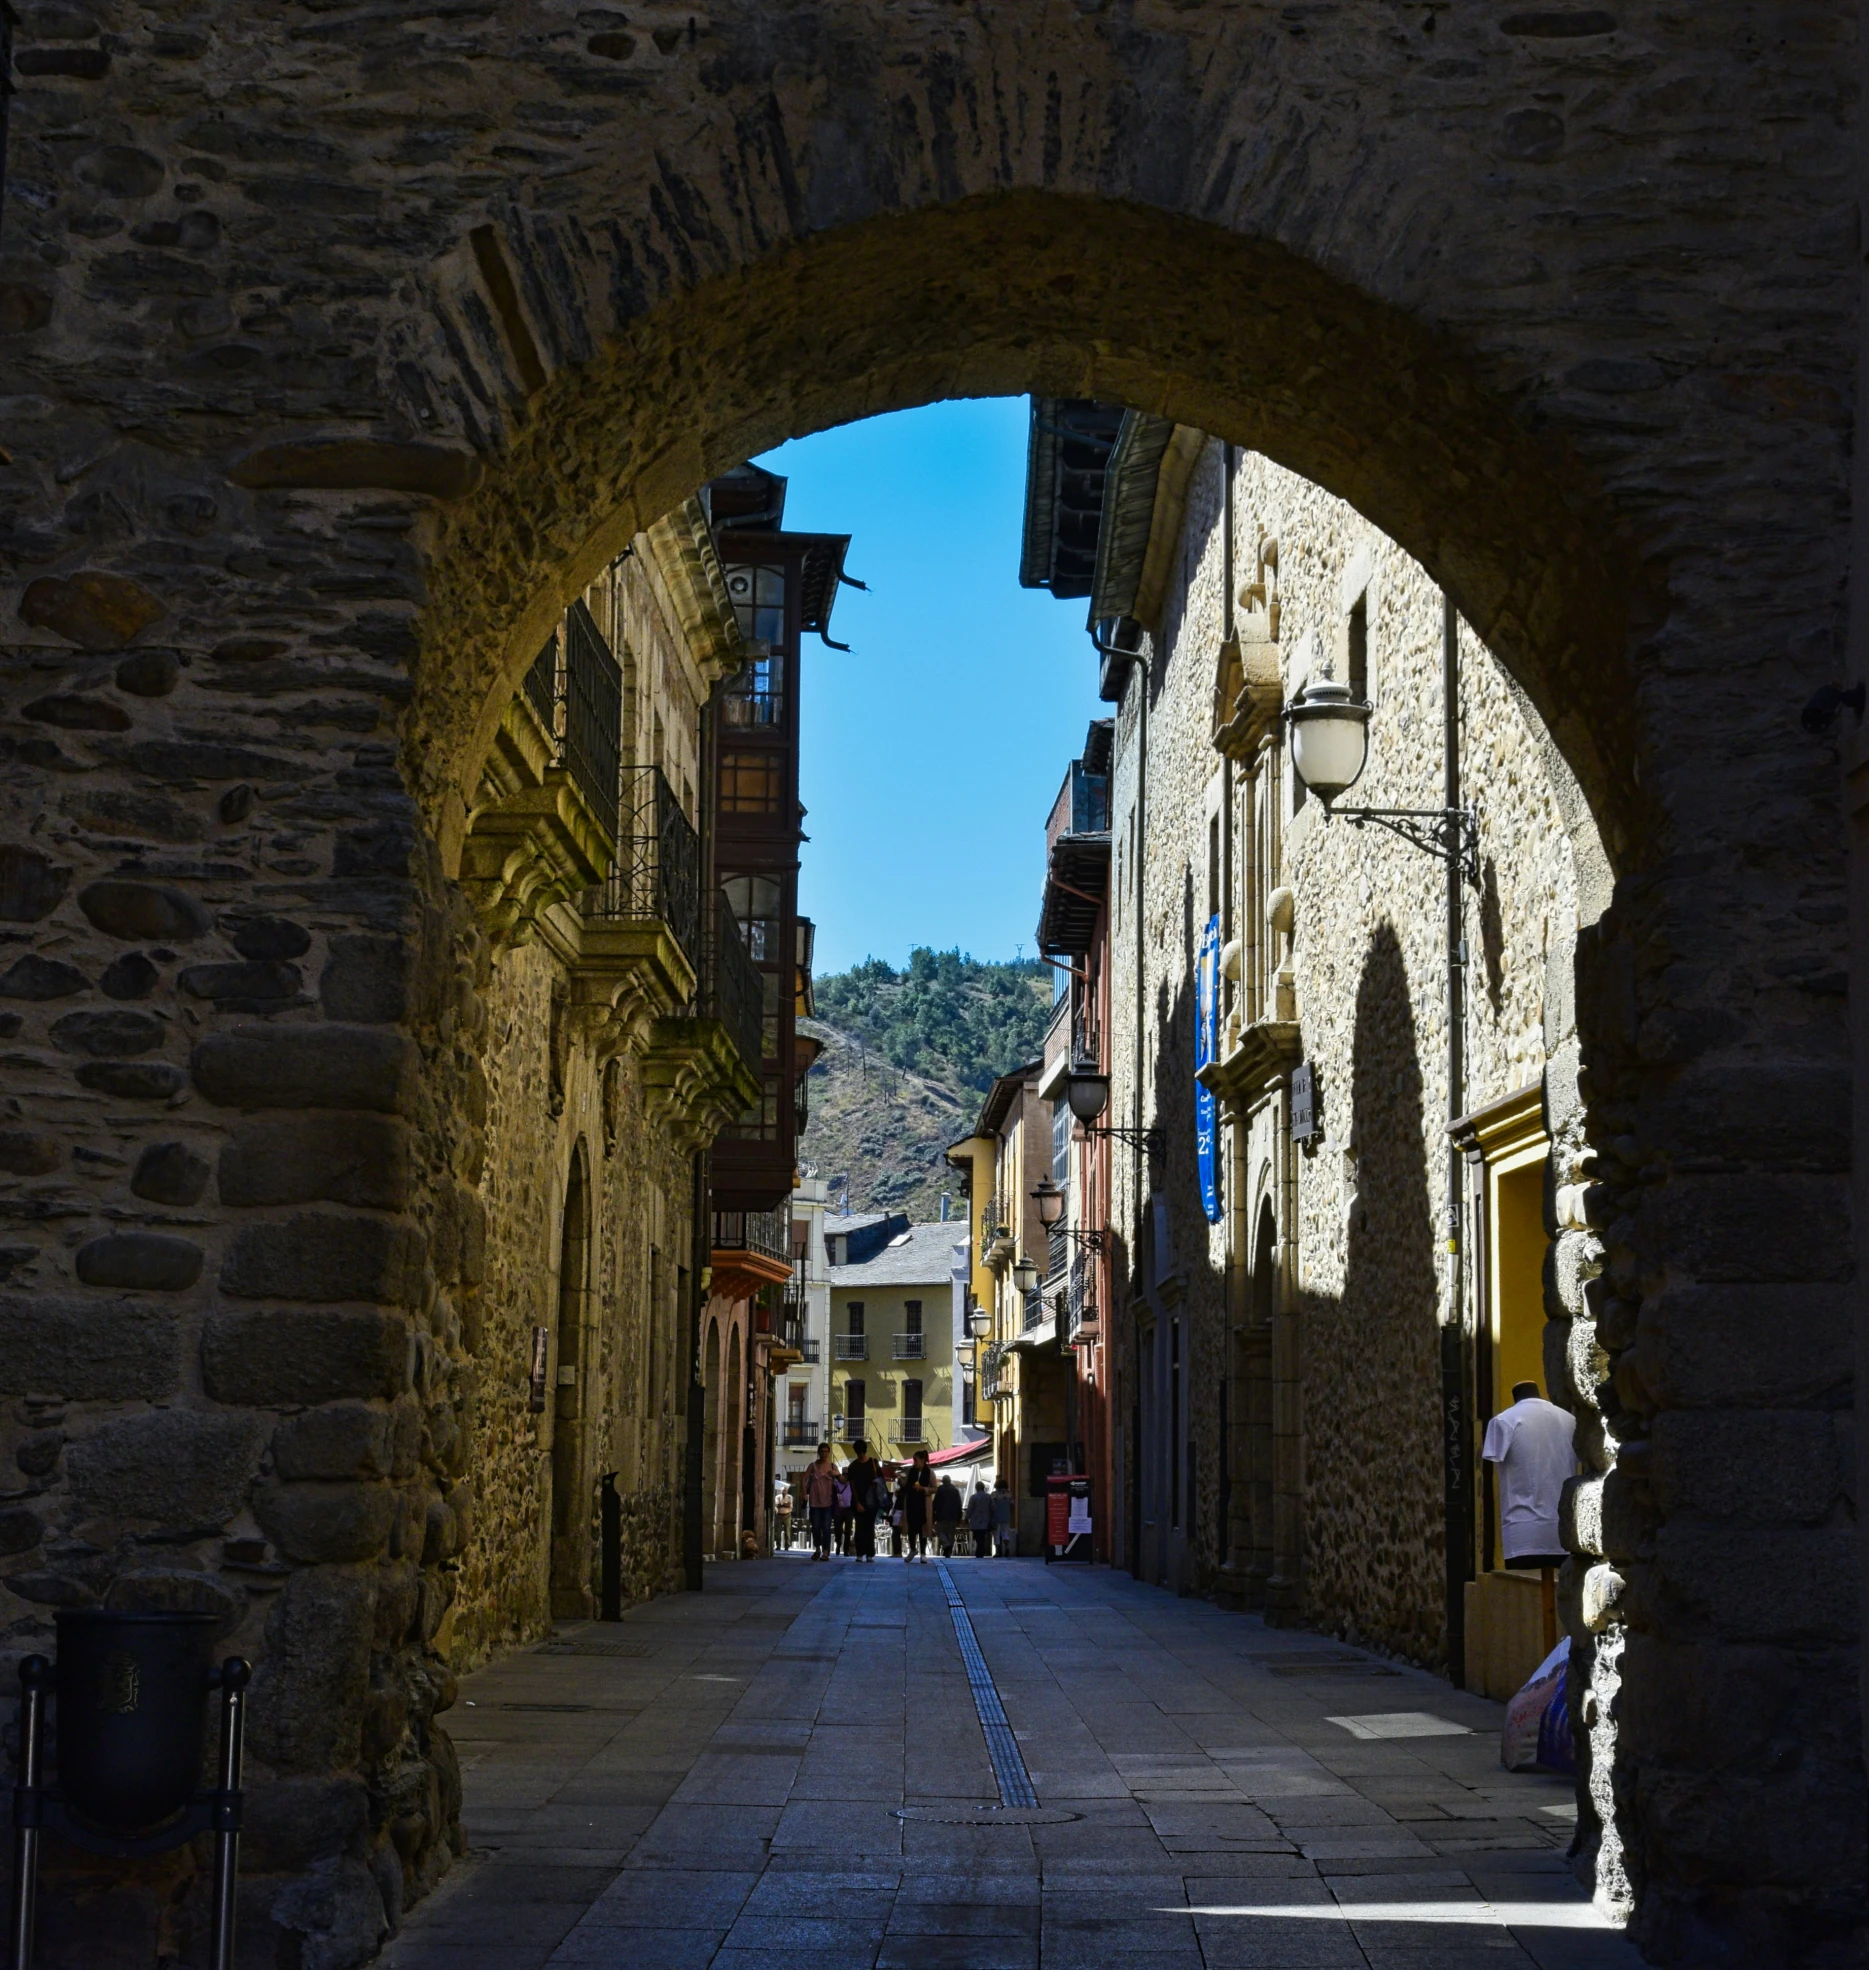 an archway is over the walkway and a cobblestone alley